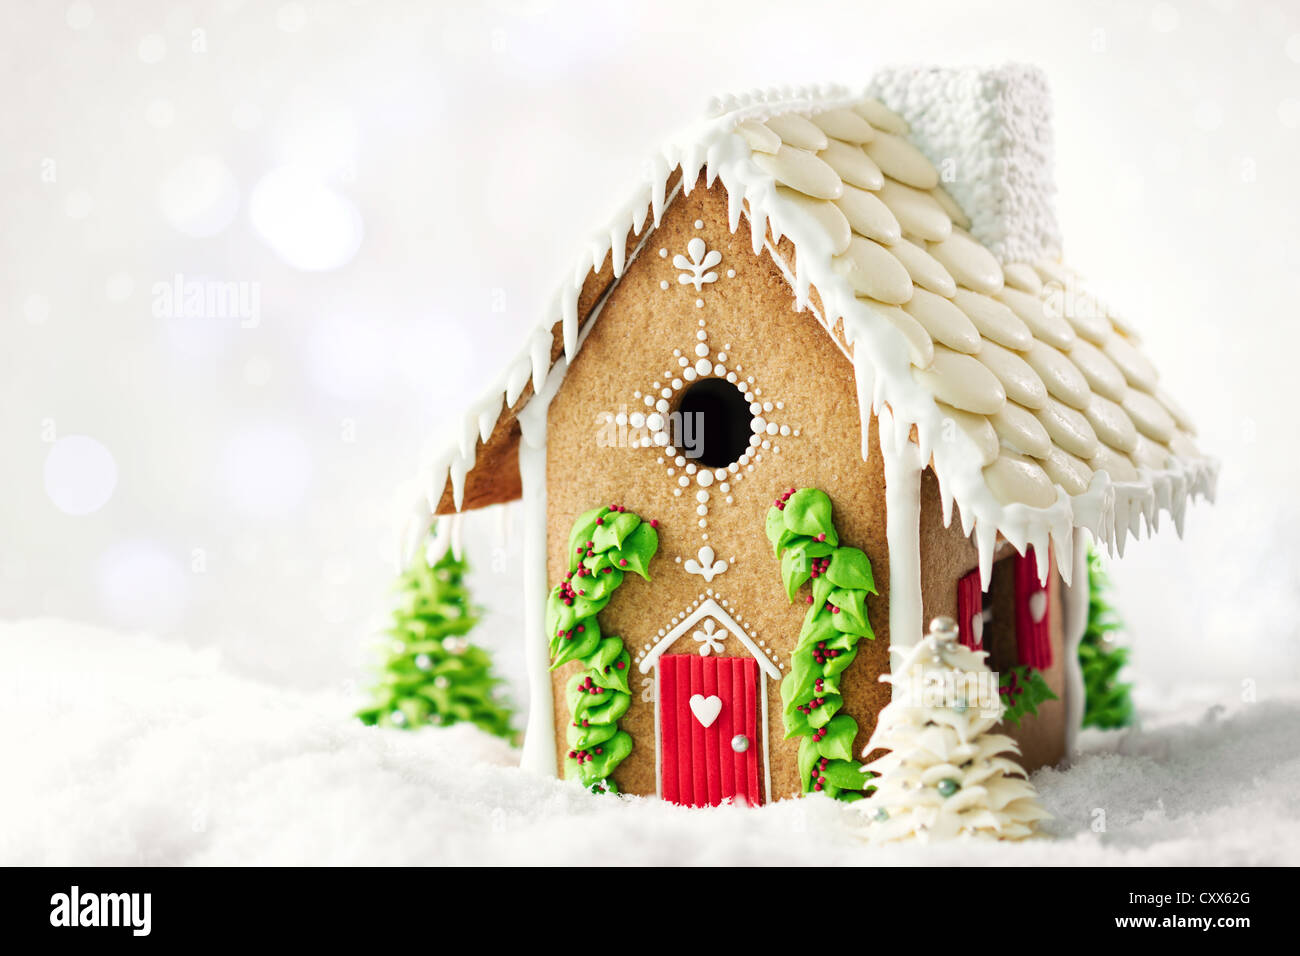 Gingerbread House Banque D'Images